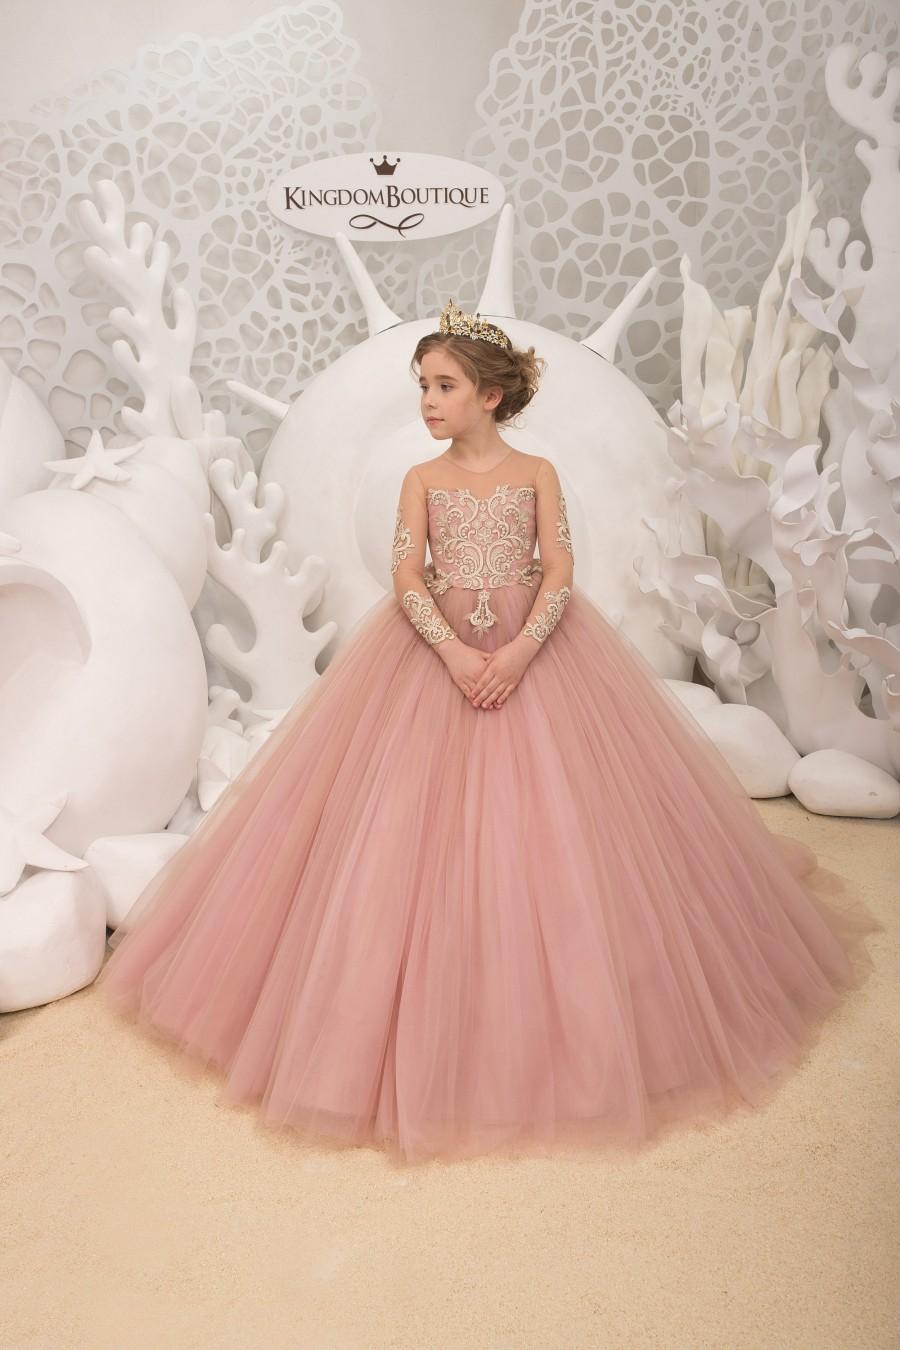 Mariage - Blush pink and Gold Flower Girl Dress - Birthday Wedding Party Holiday Bridesmaid Flower Girl Blush pink and Gold Tulle Lace Dress 21-153